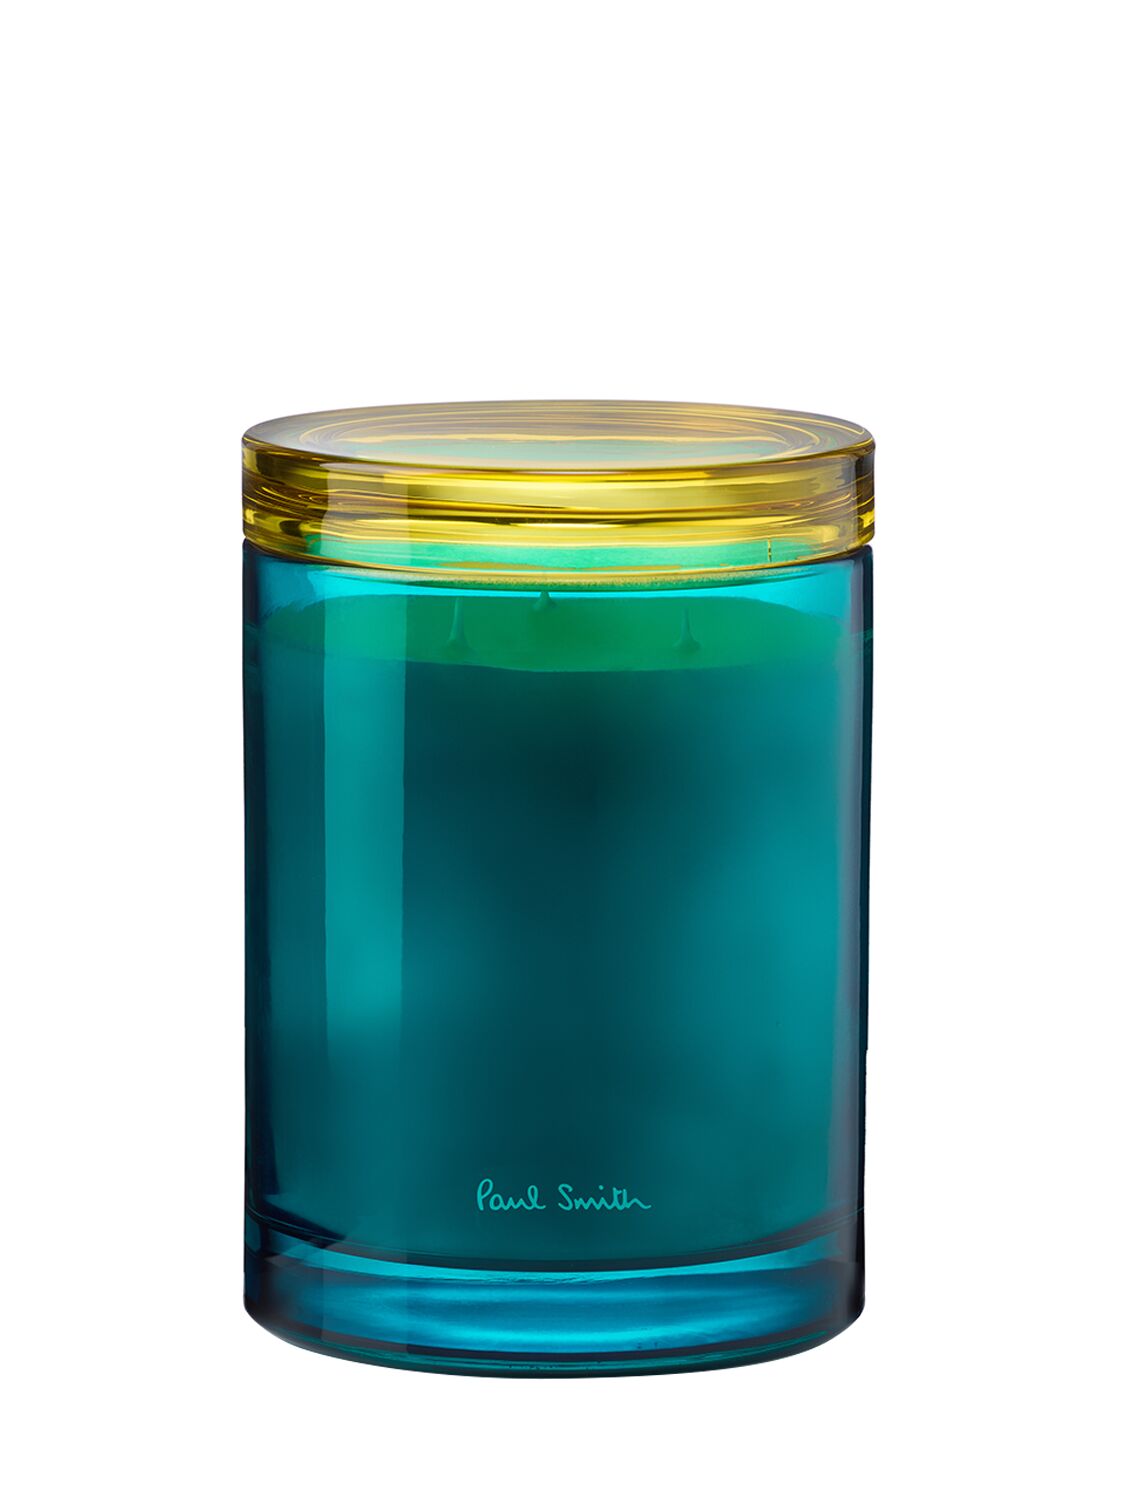 Paul Smith 1千克 Sunseeker Candle香氛蜡烛 In Blue